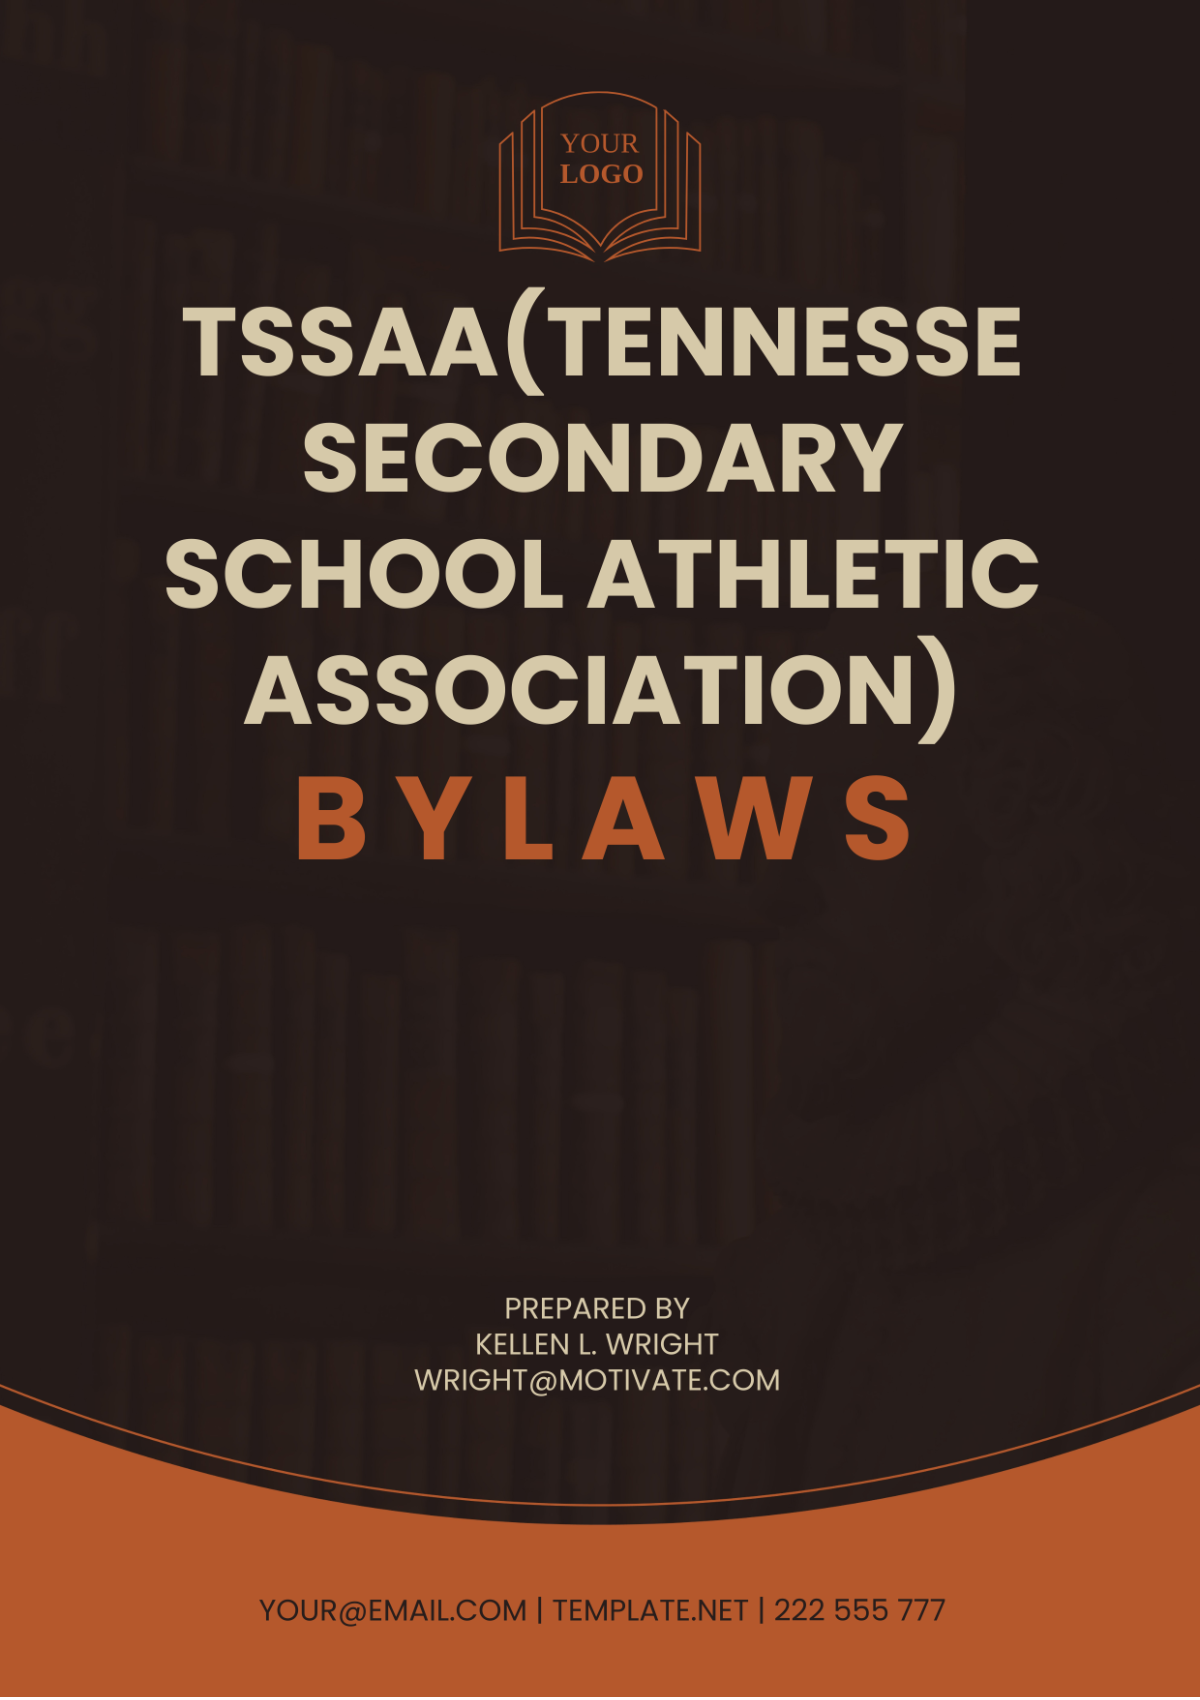 Tssaa(Tennessee Secondary School Athletic Association) Bylaws Template